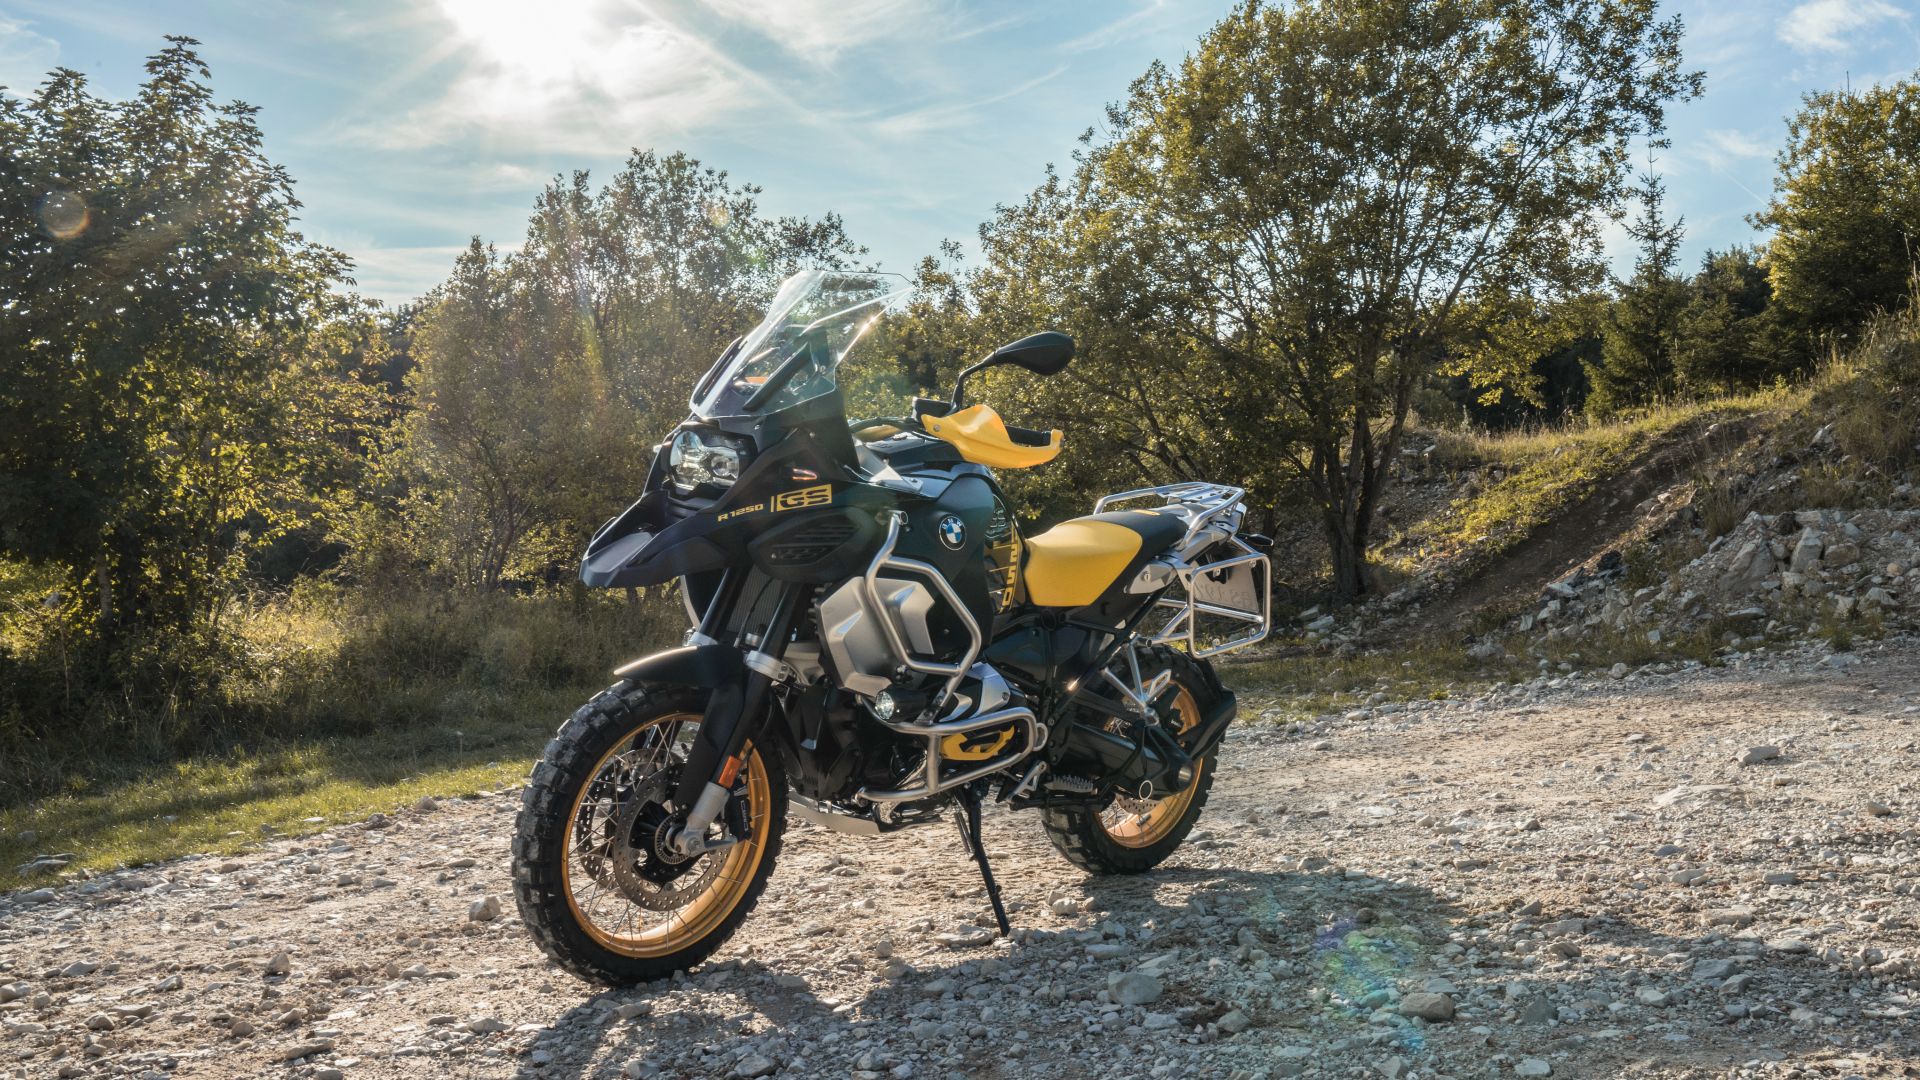 BMW R1250 GS standing off-road